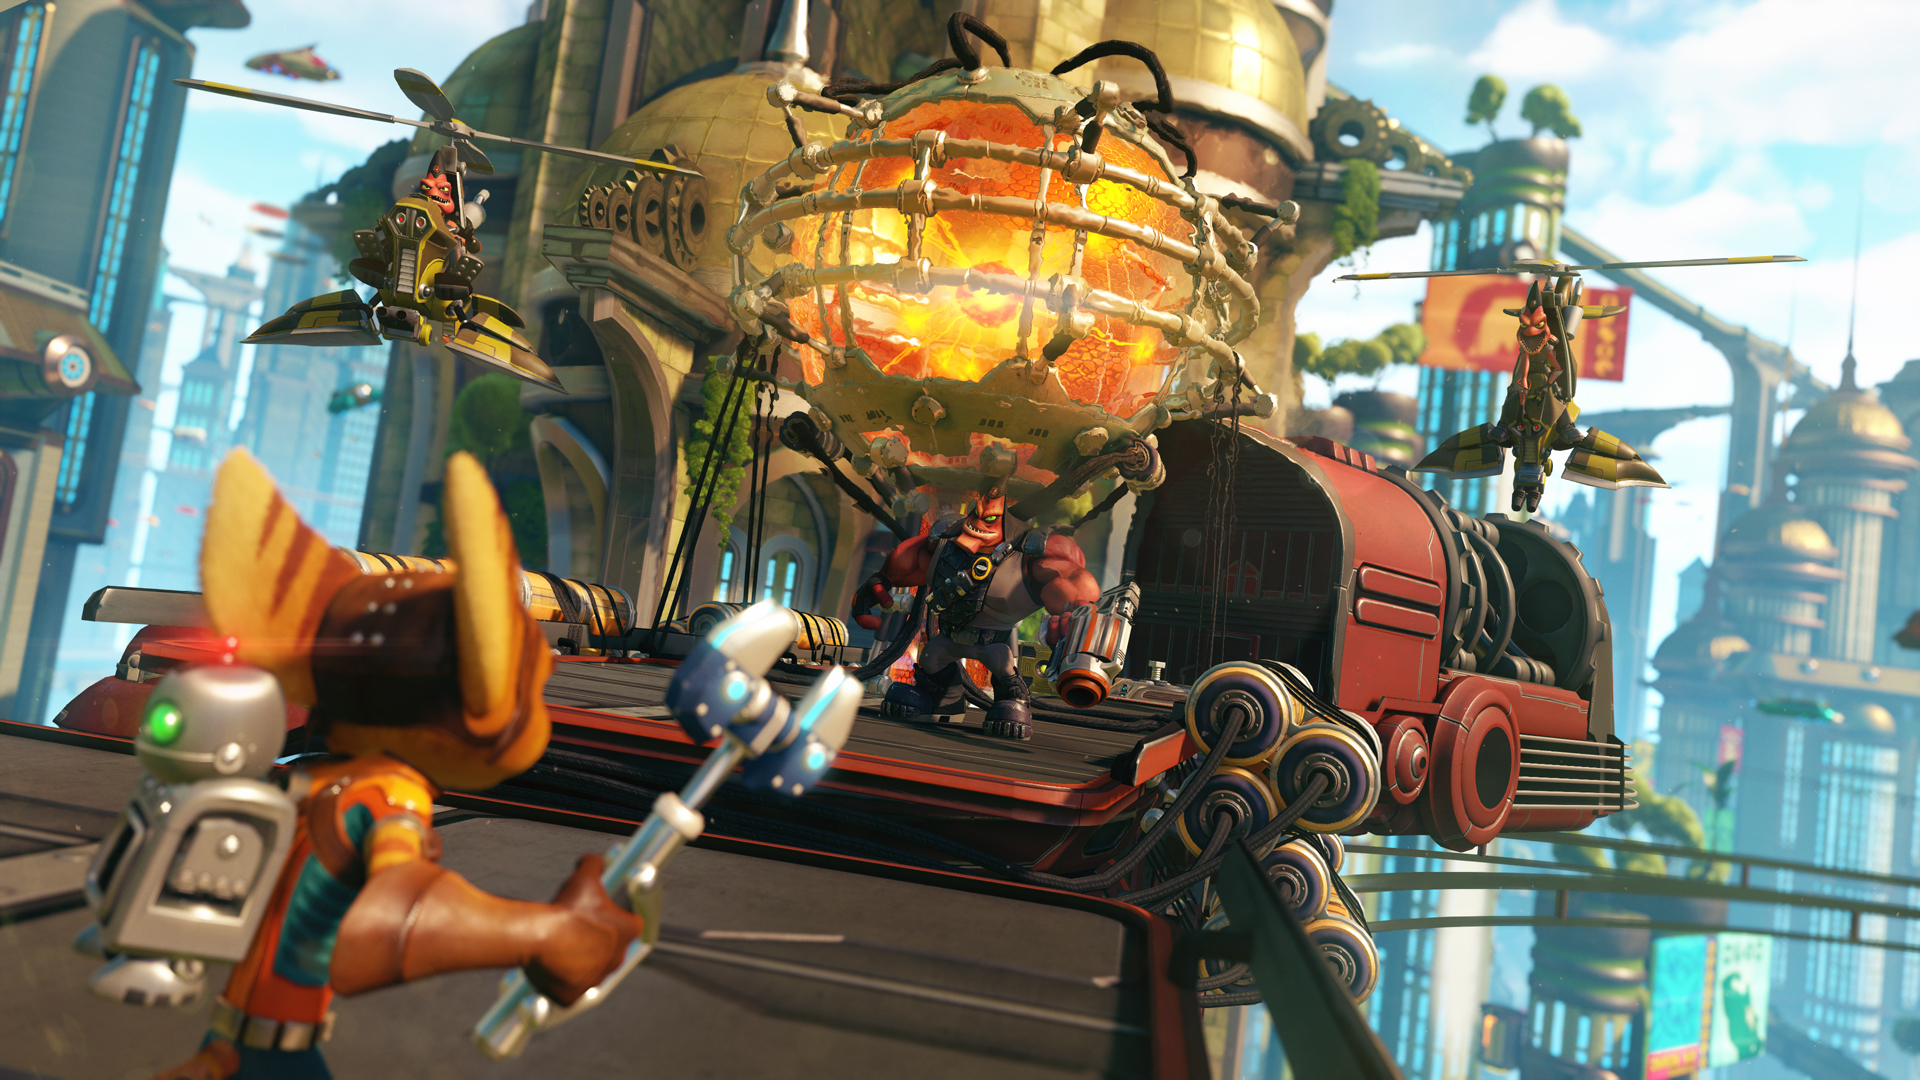 Ratchet and Clank Review